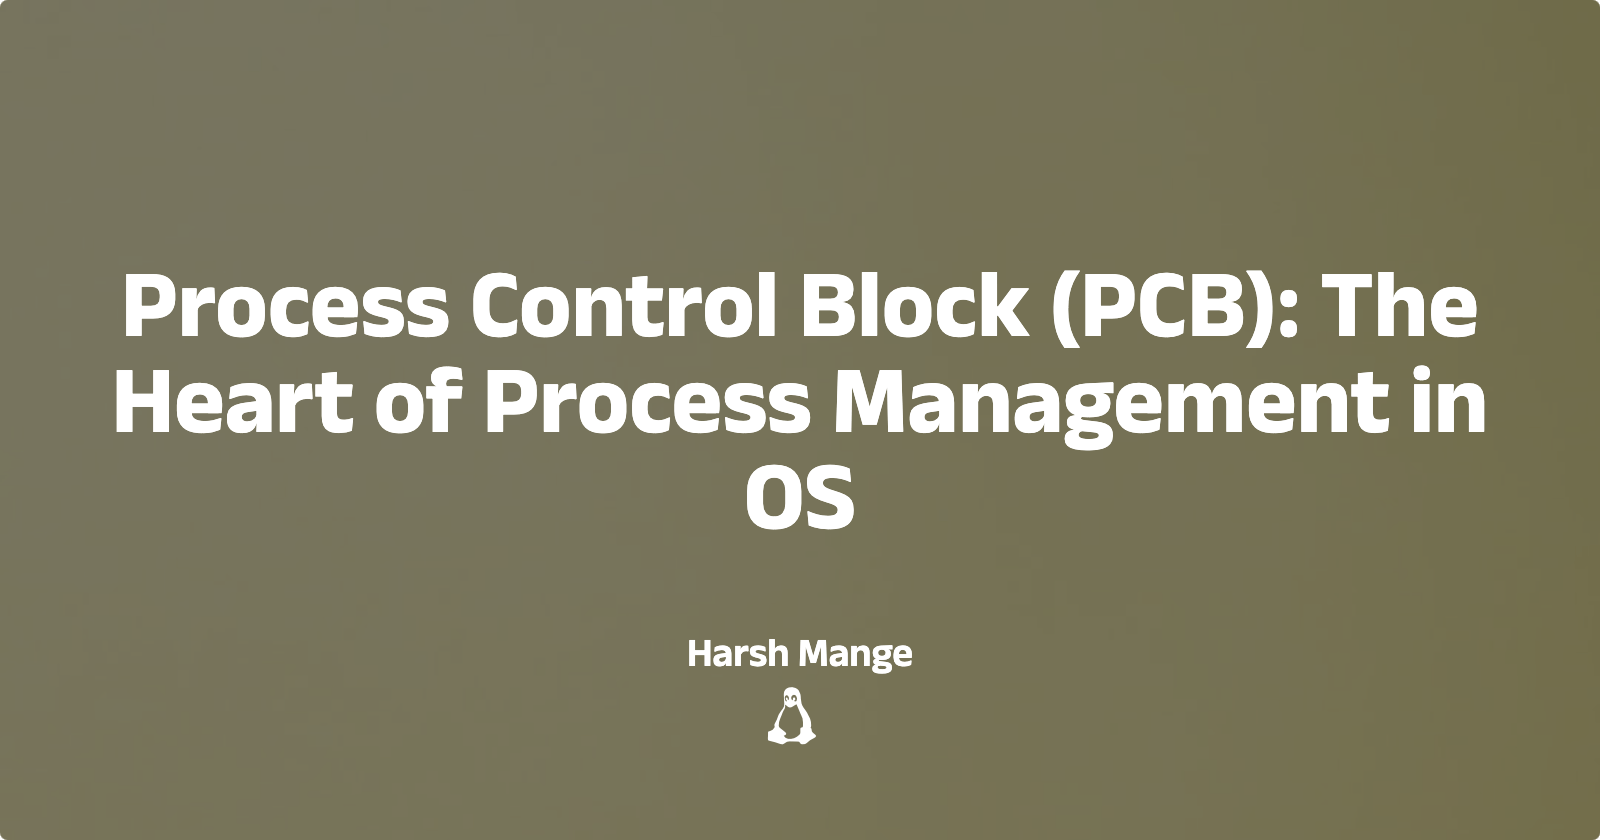 Process Control Block (PCB): The Heart of Process Management in OS